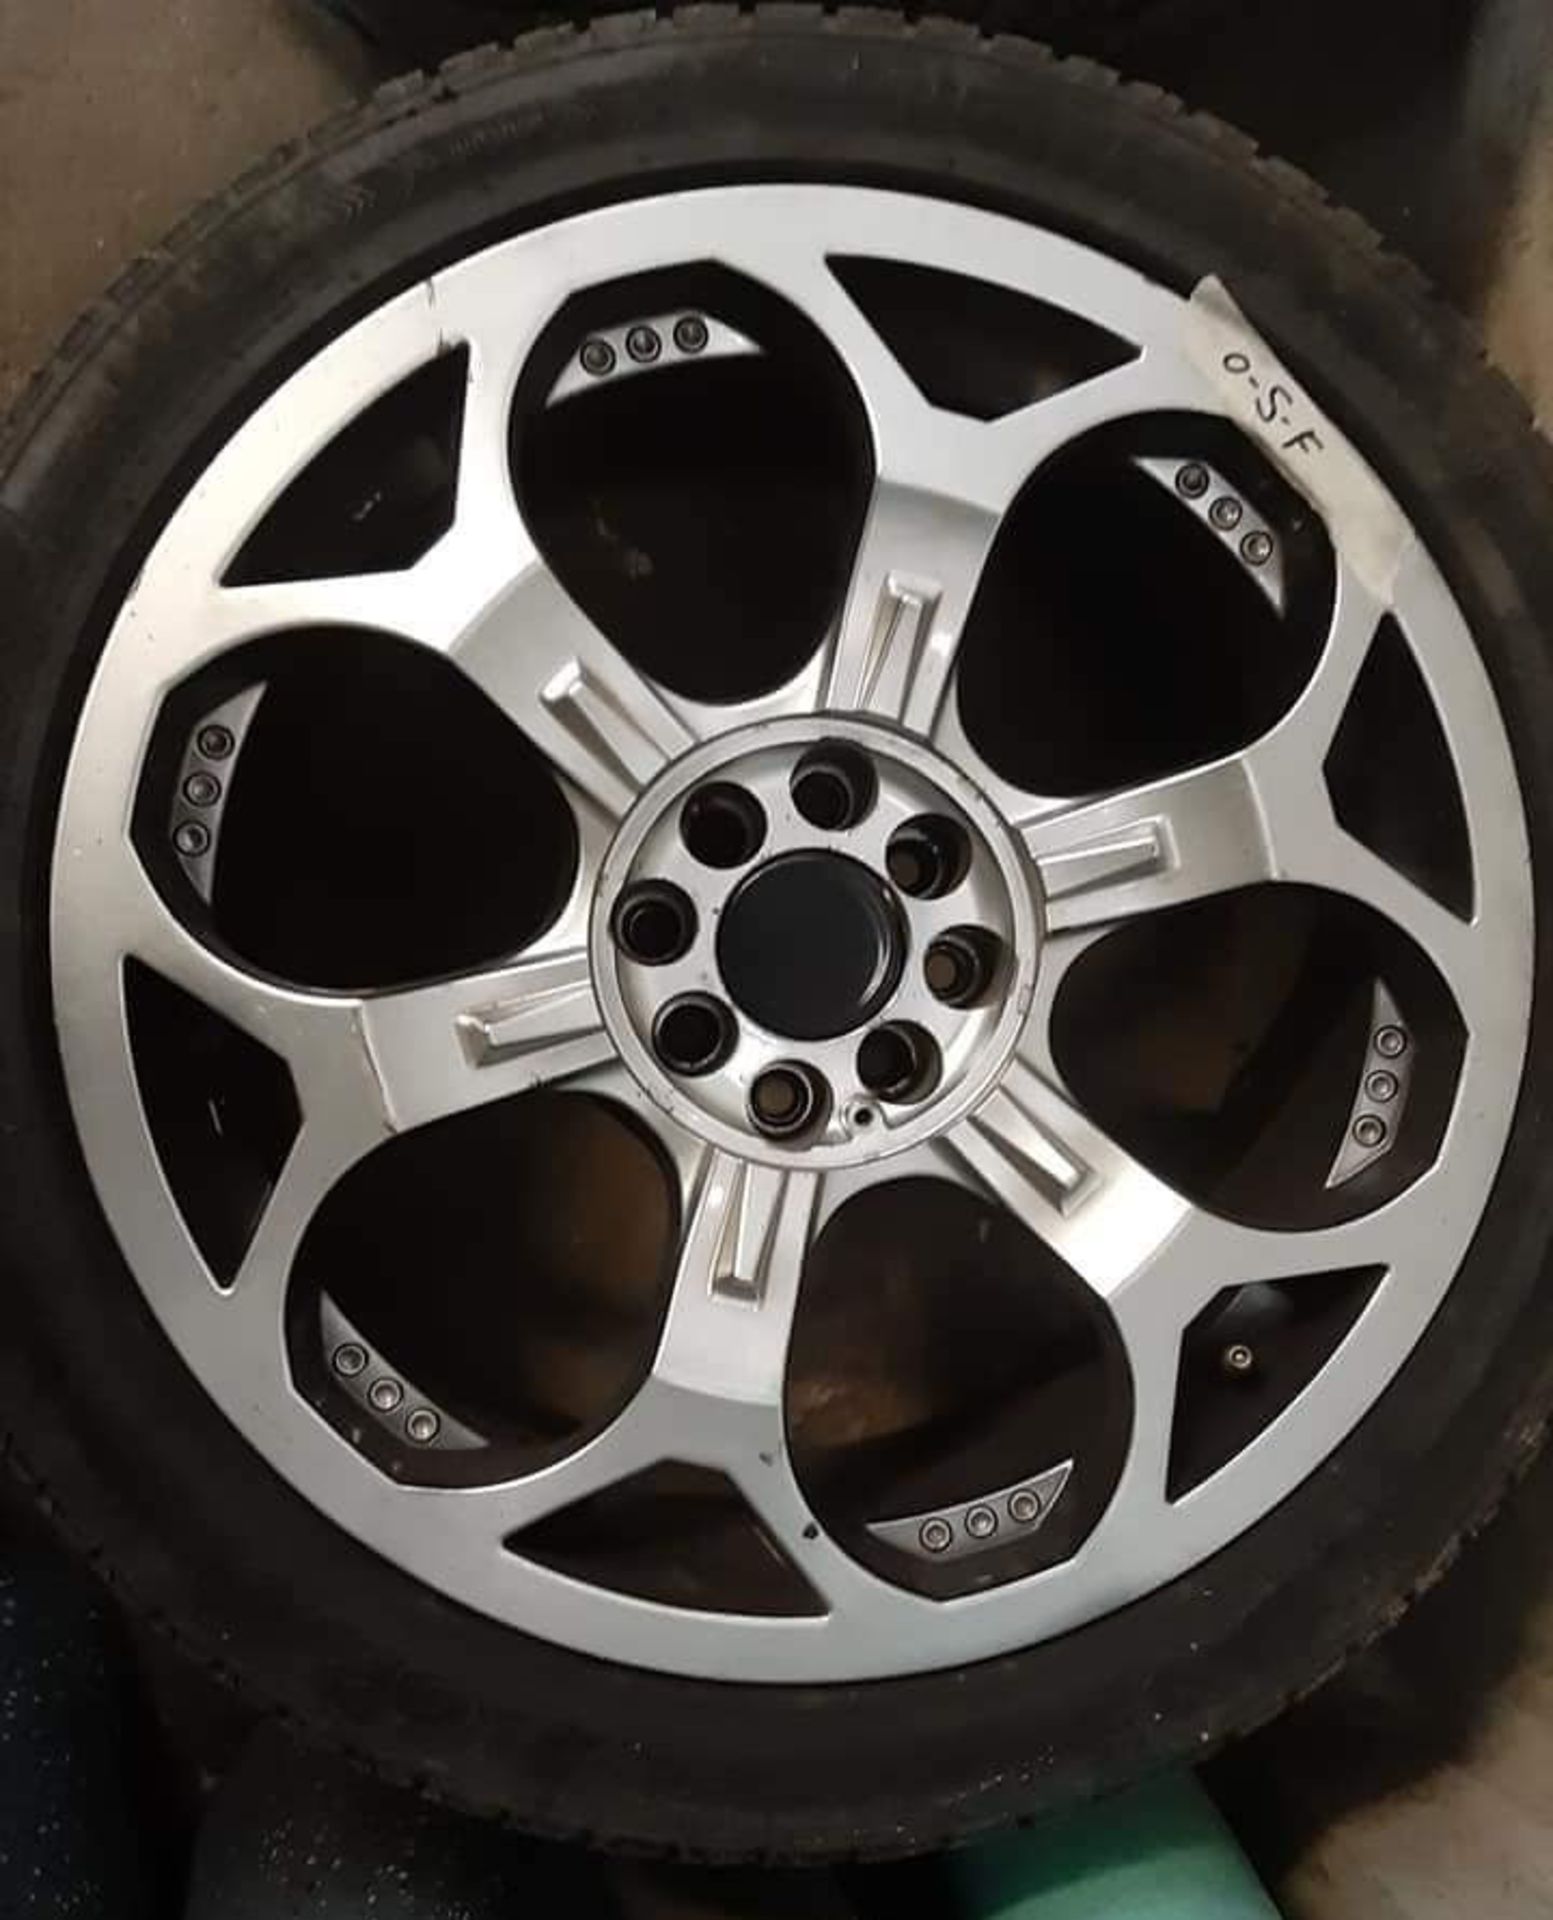 Set of 4 Multi Fitment 4 Stud 17" x 7.0" Alloy Wheels with 205/45ZR17 Tyres - CL444 - No VAT on - Image 2 of 9